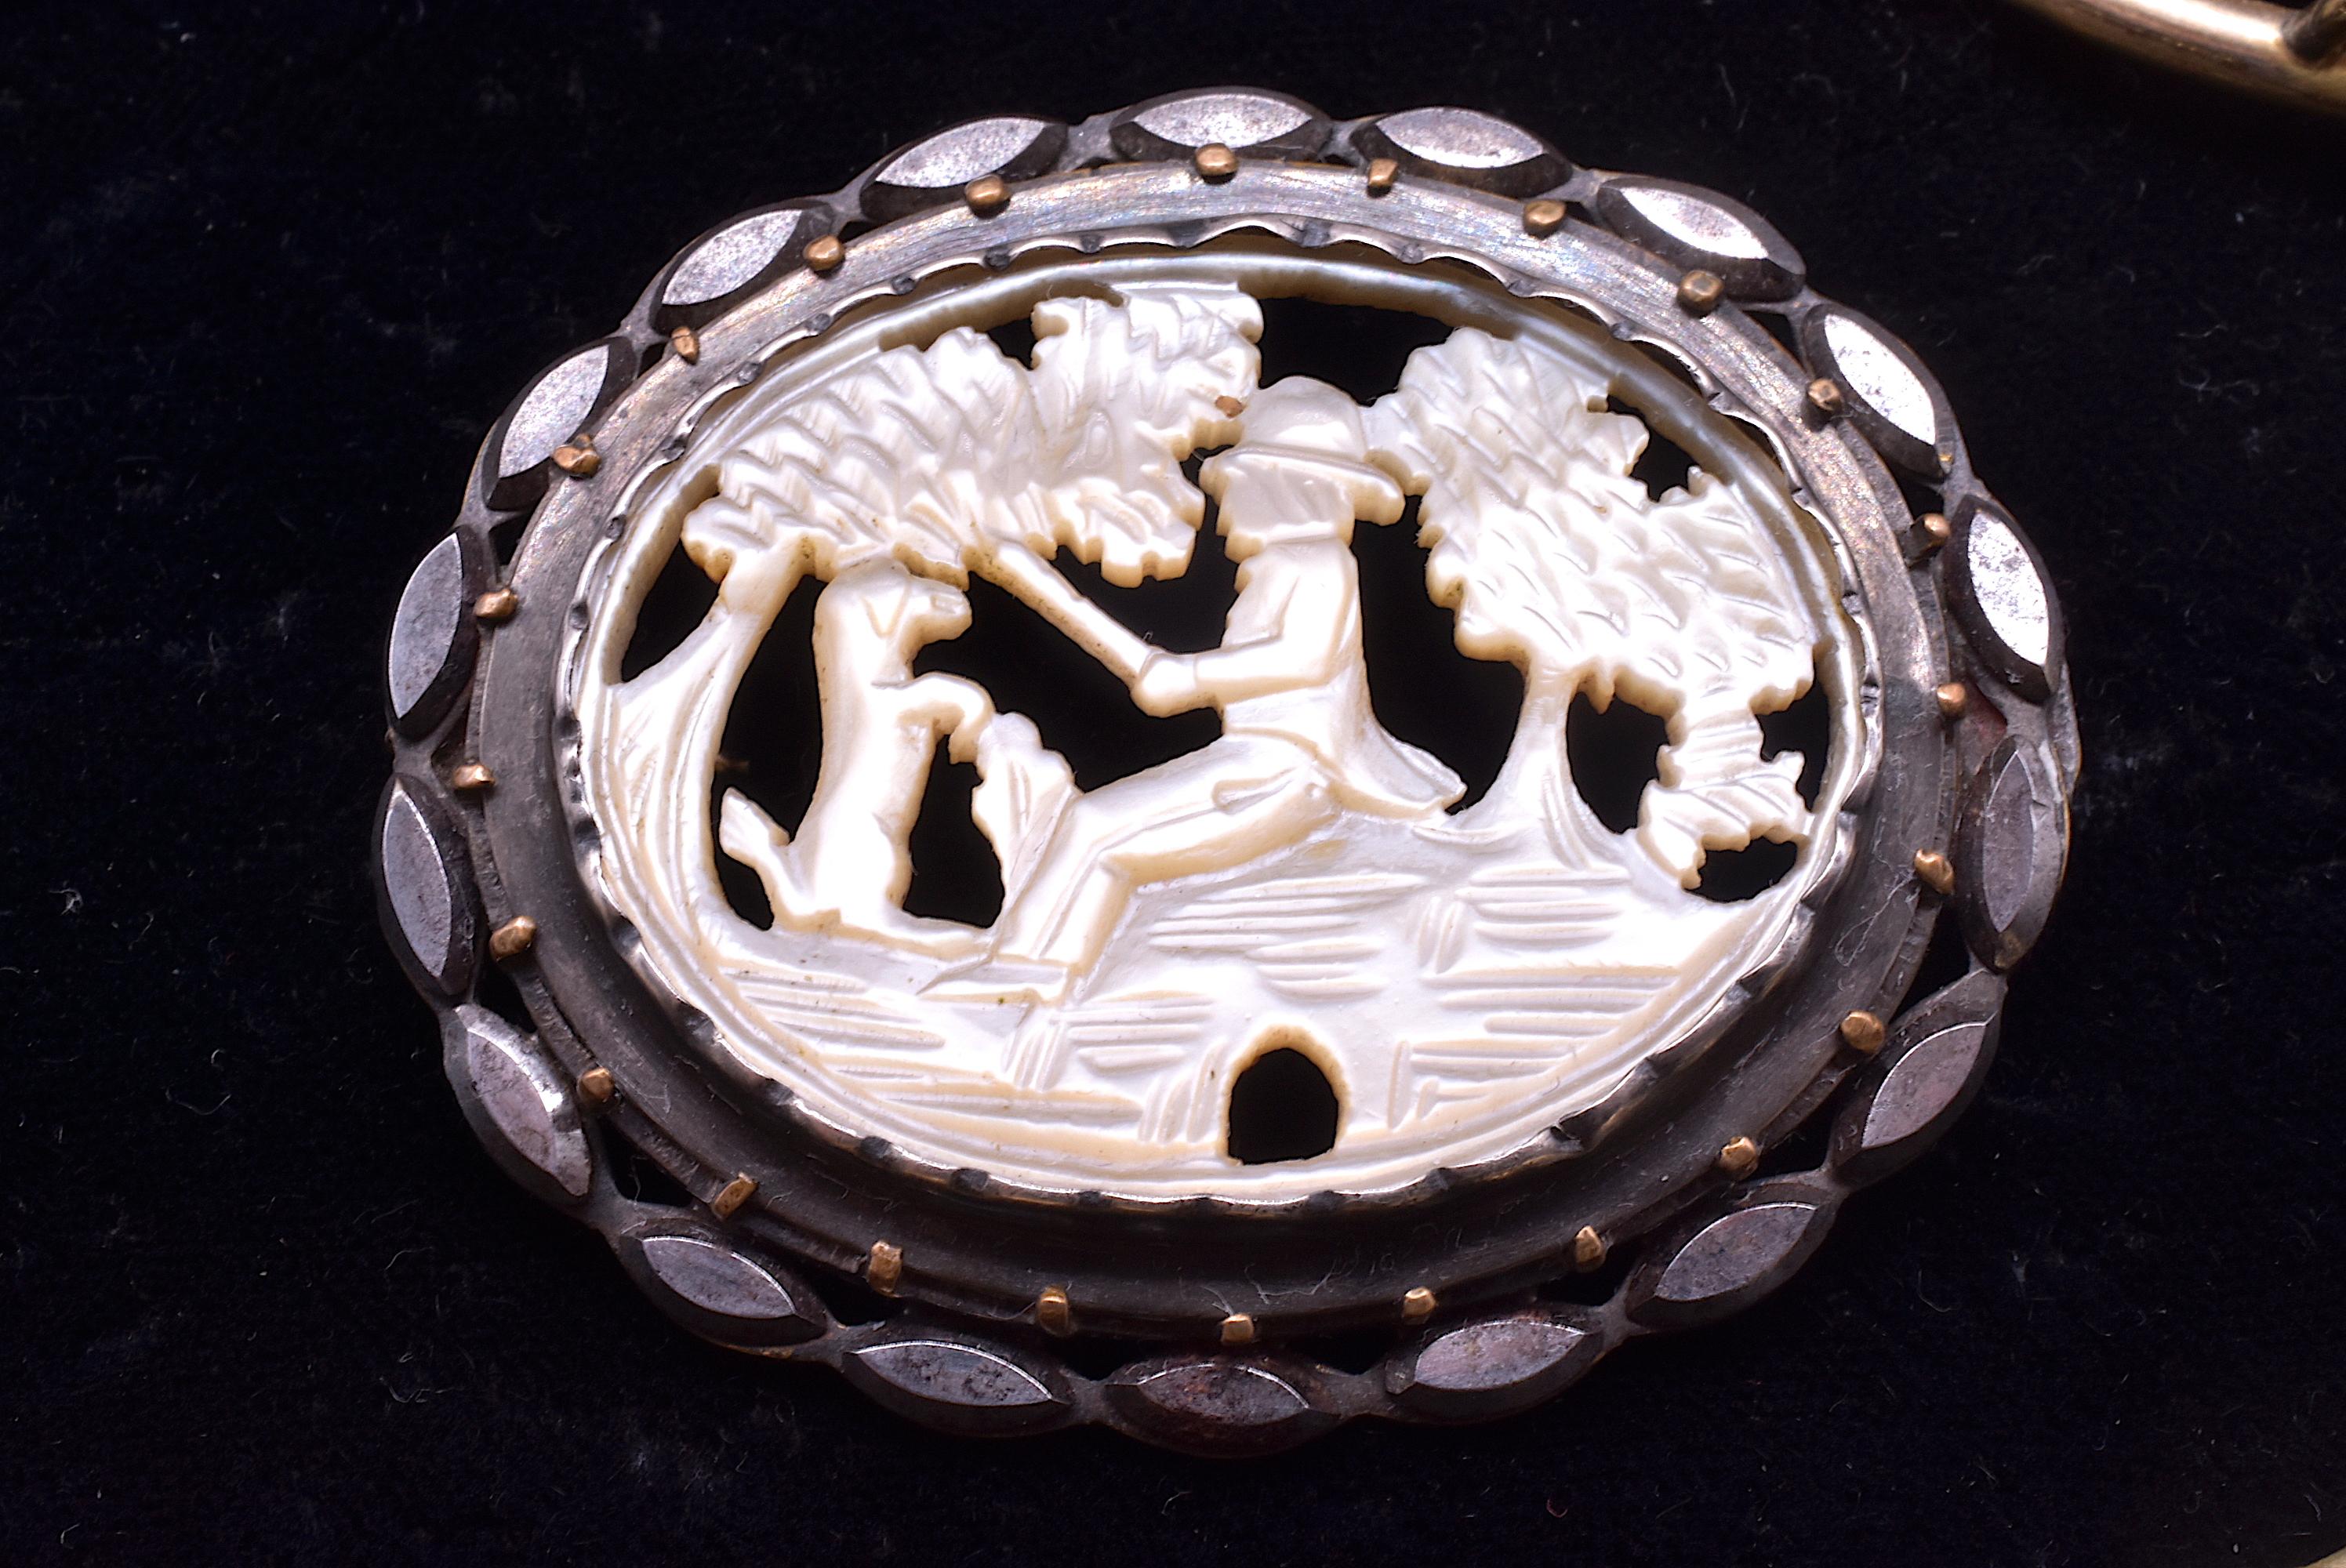 Enchanting brooch of cut steel and mother of pearl with carved image of a faithful dog standing at attention as his human companion peacefully angles for a catch under the shade of a tree. The scene is carved from Mother of Pearl and mounted in cut